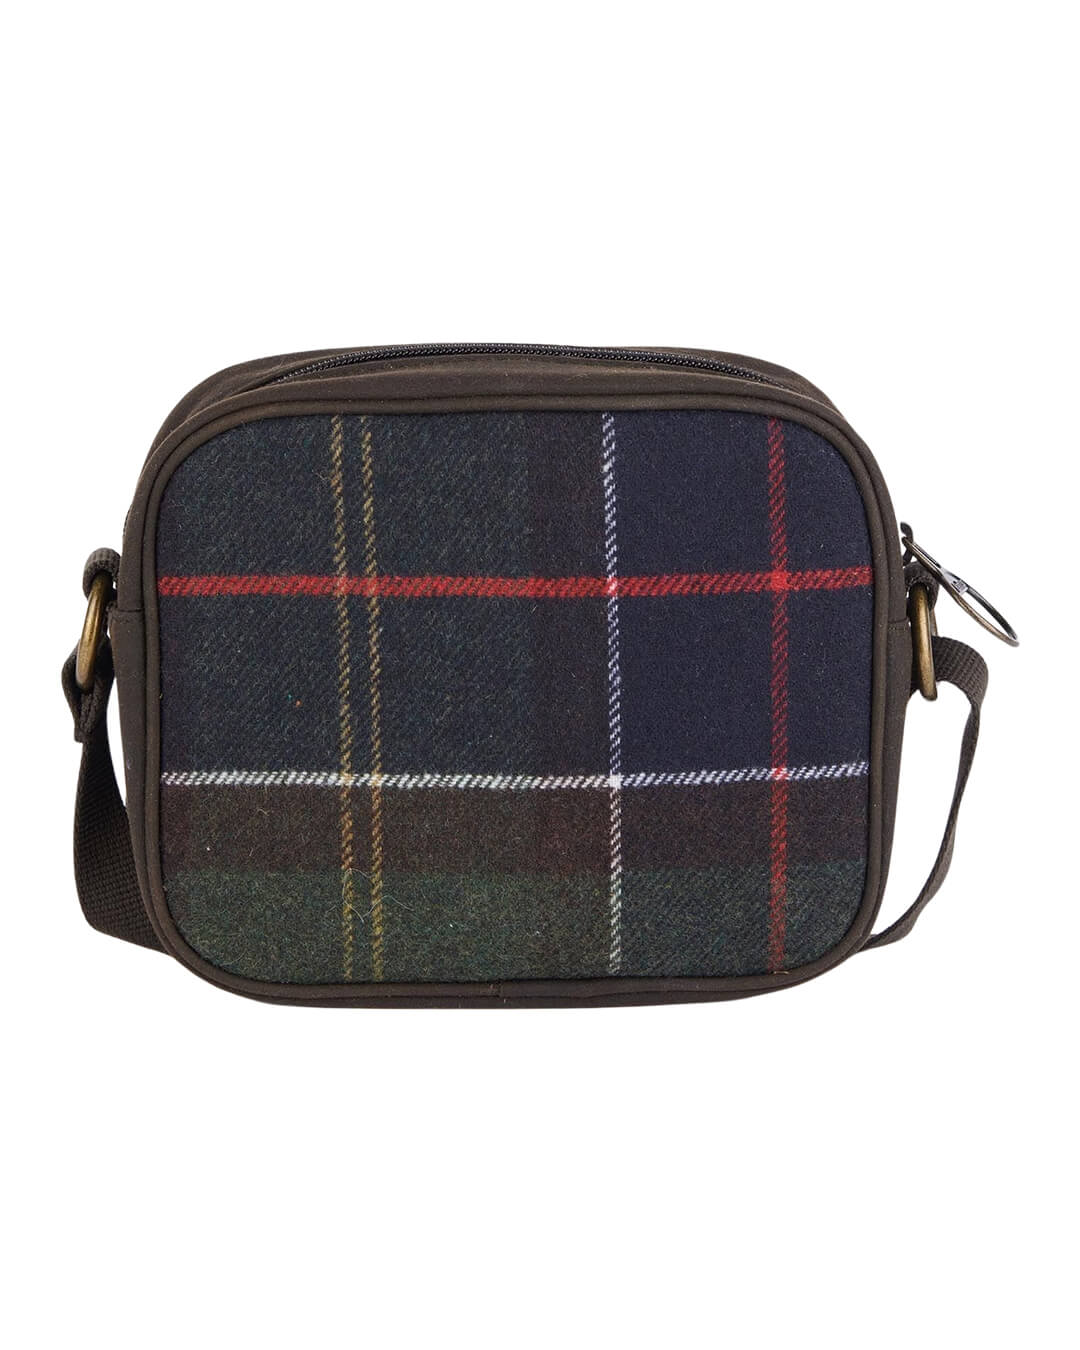 Barbour Bags ONE Barbour Contin Cross Body Bag